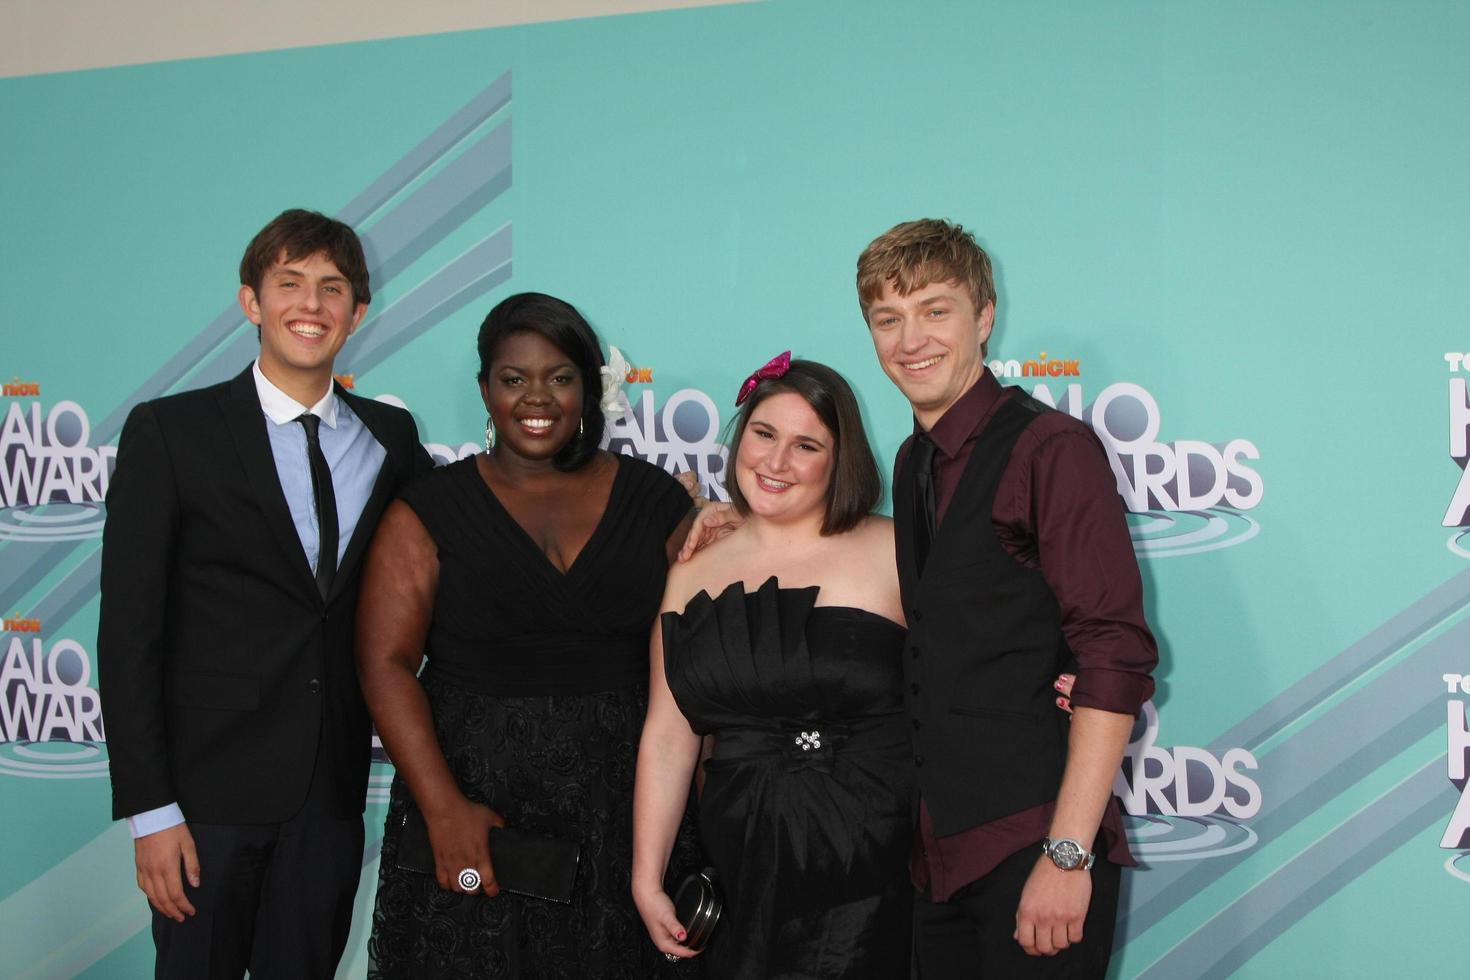 LOS ANGELES, OCT 26 -  L-R 2011 HALO Award honorees Kyle Weiss, Shanoah Washington, Emily-Anne Rigal, and James O Dwyer arriving at the 2011 Nickelodeon TeenNick HALO Awards at Hollywood Palladium on October 26, 2011 in Los Angeles, CA photo